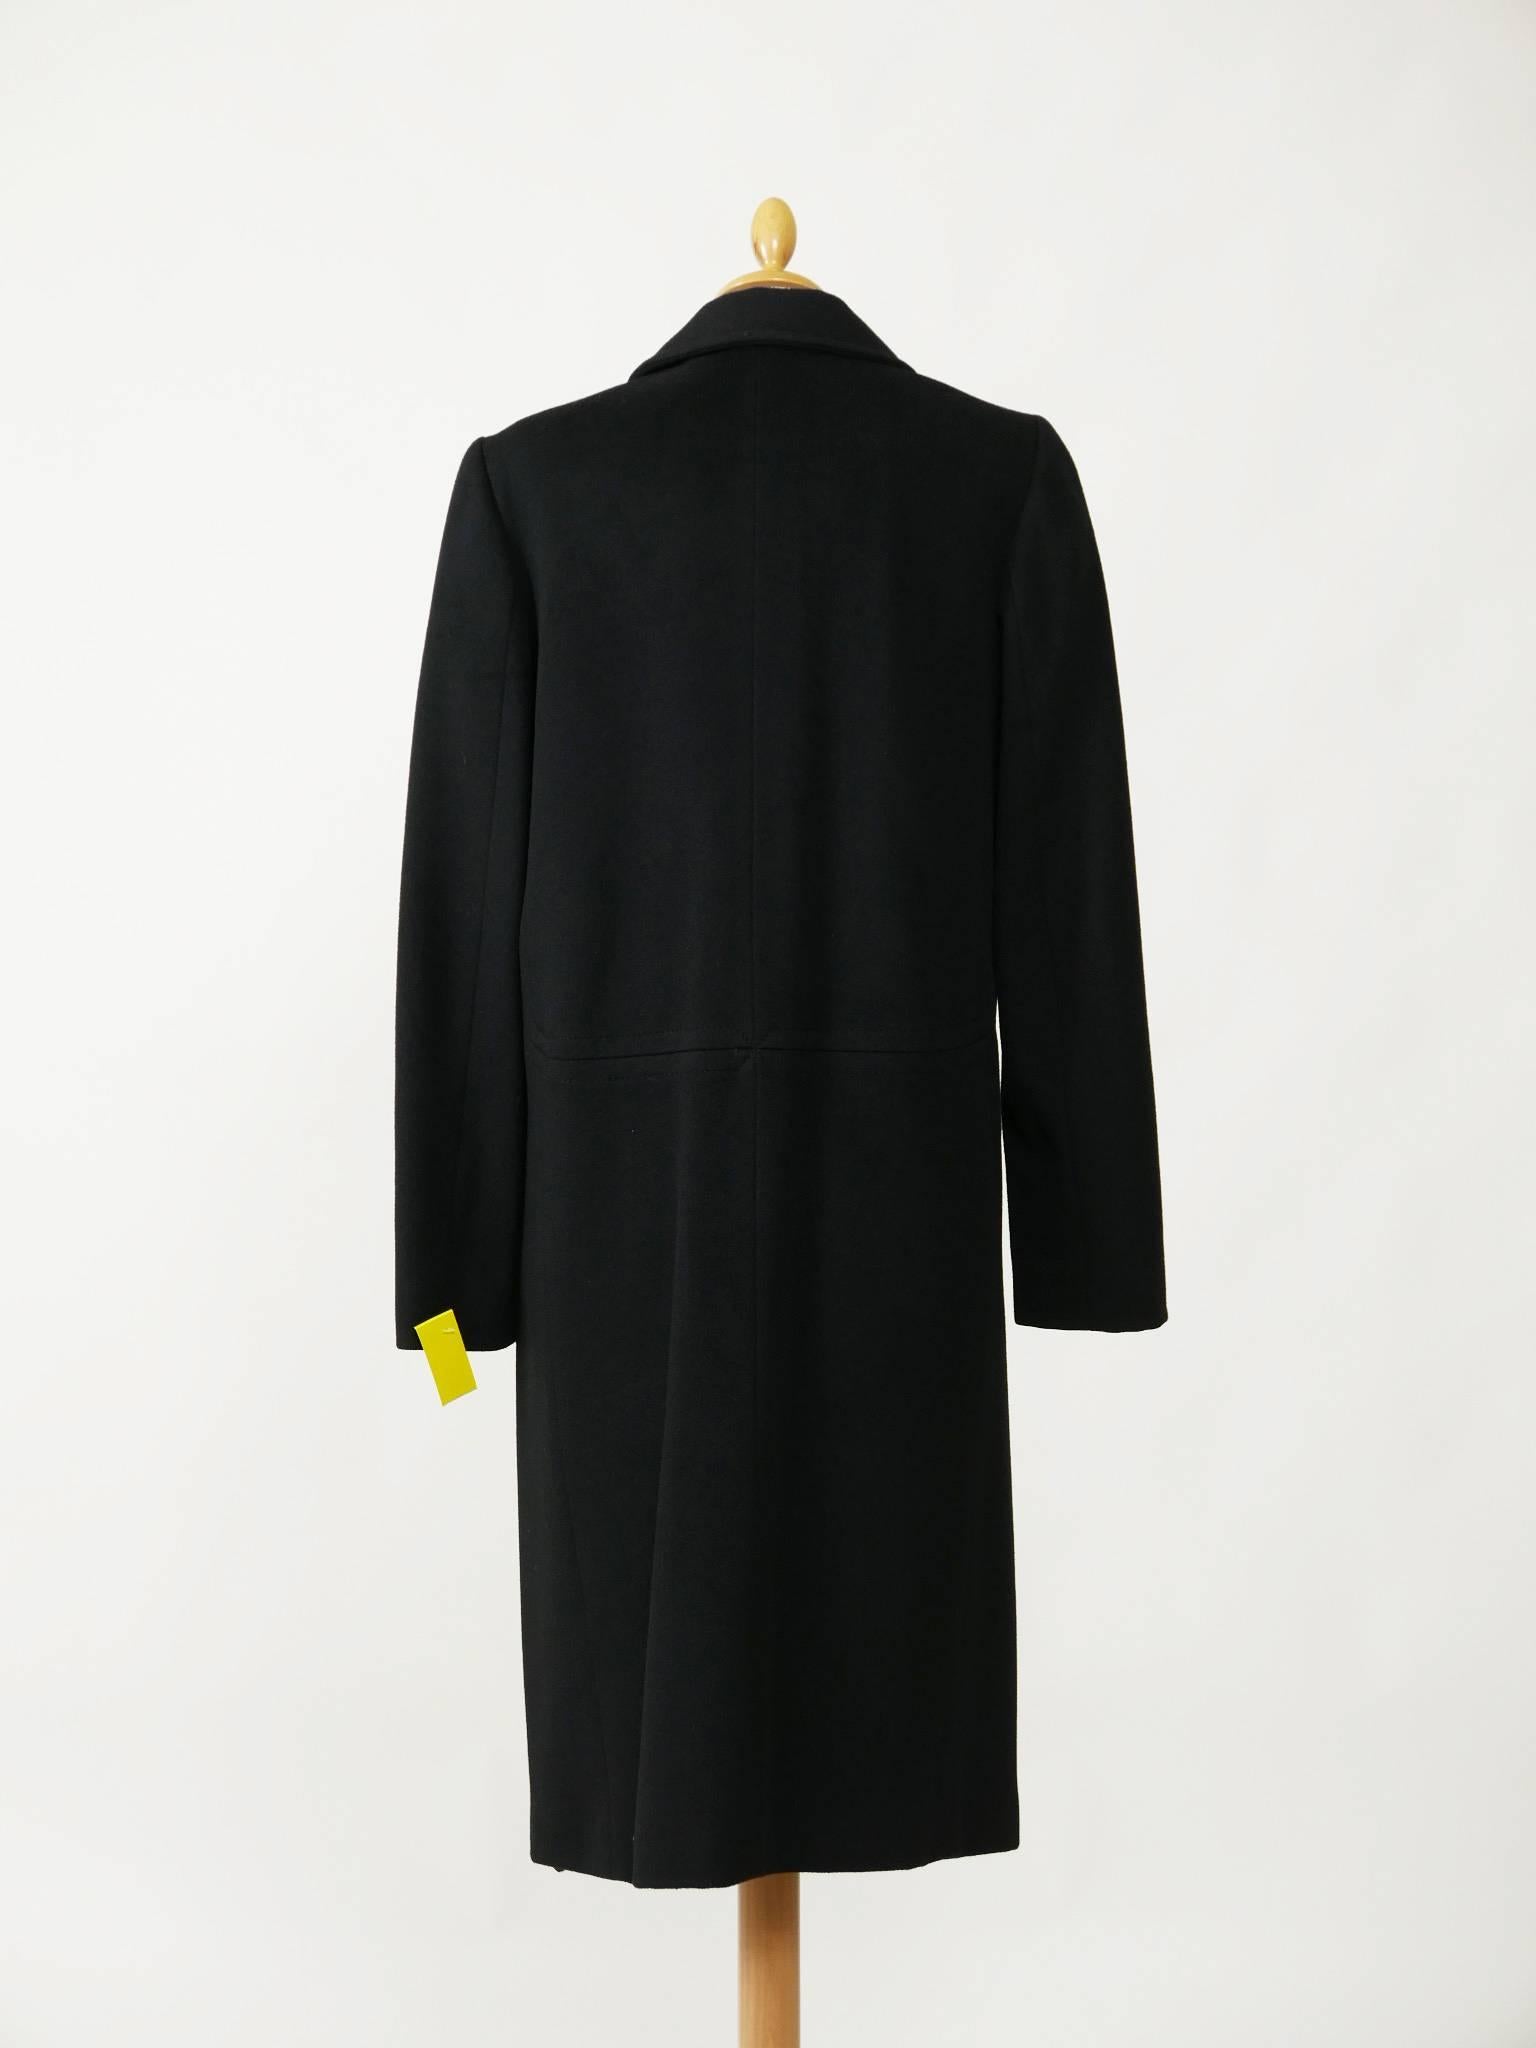 Women's Gucci Made in Italy Black Wool Coat